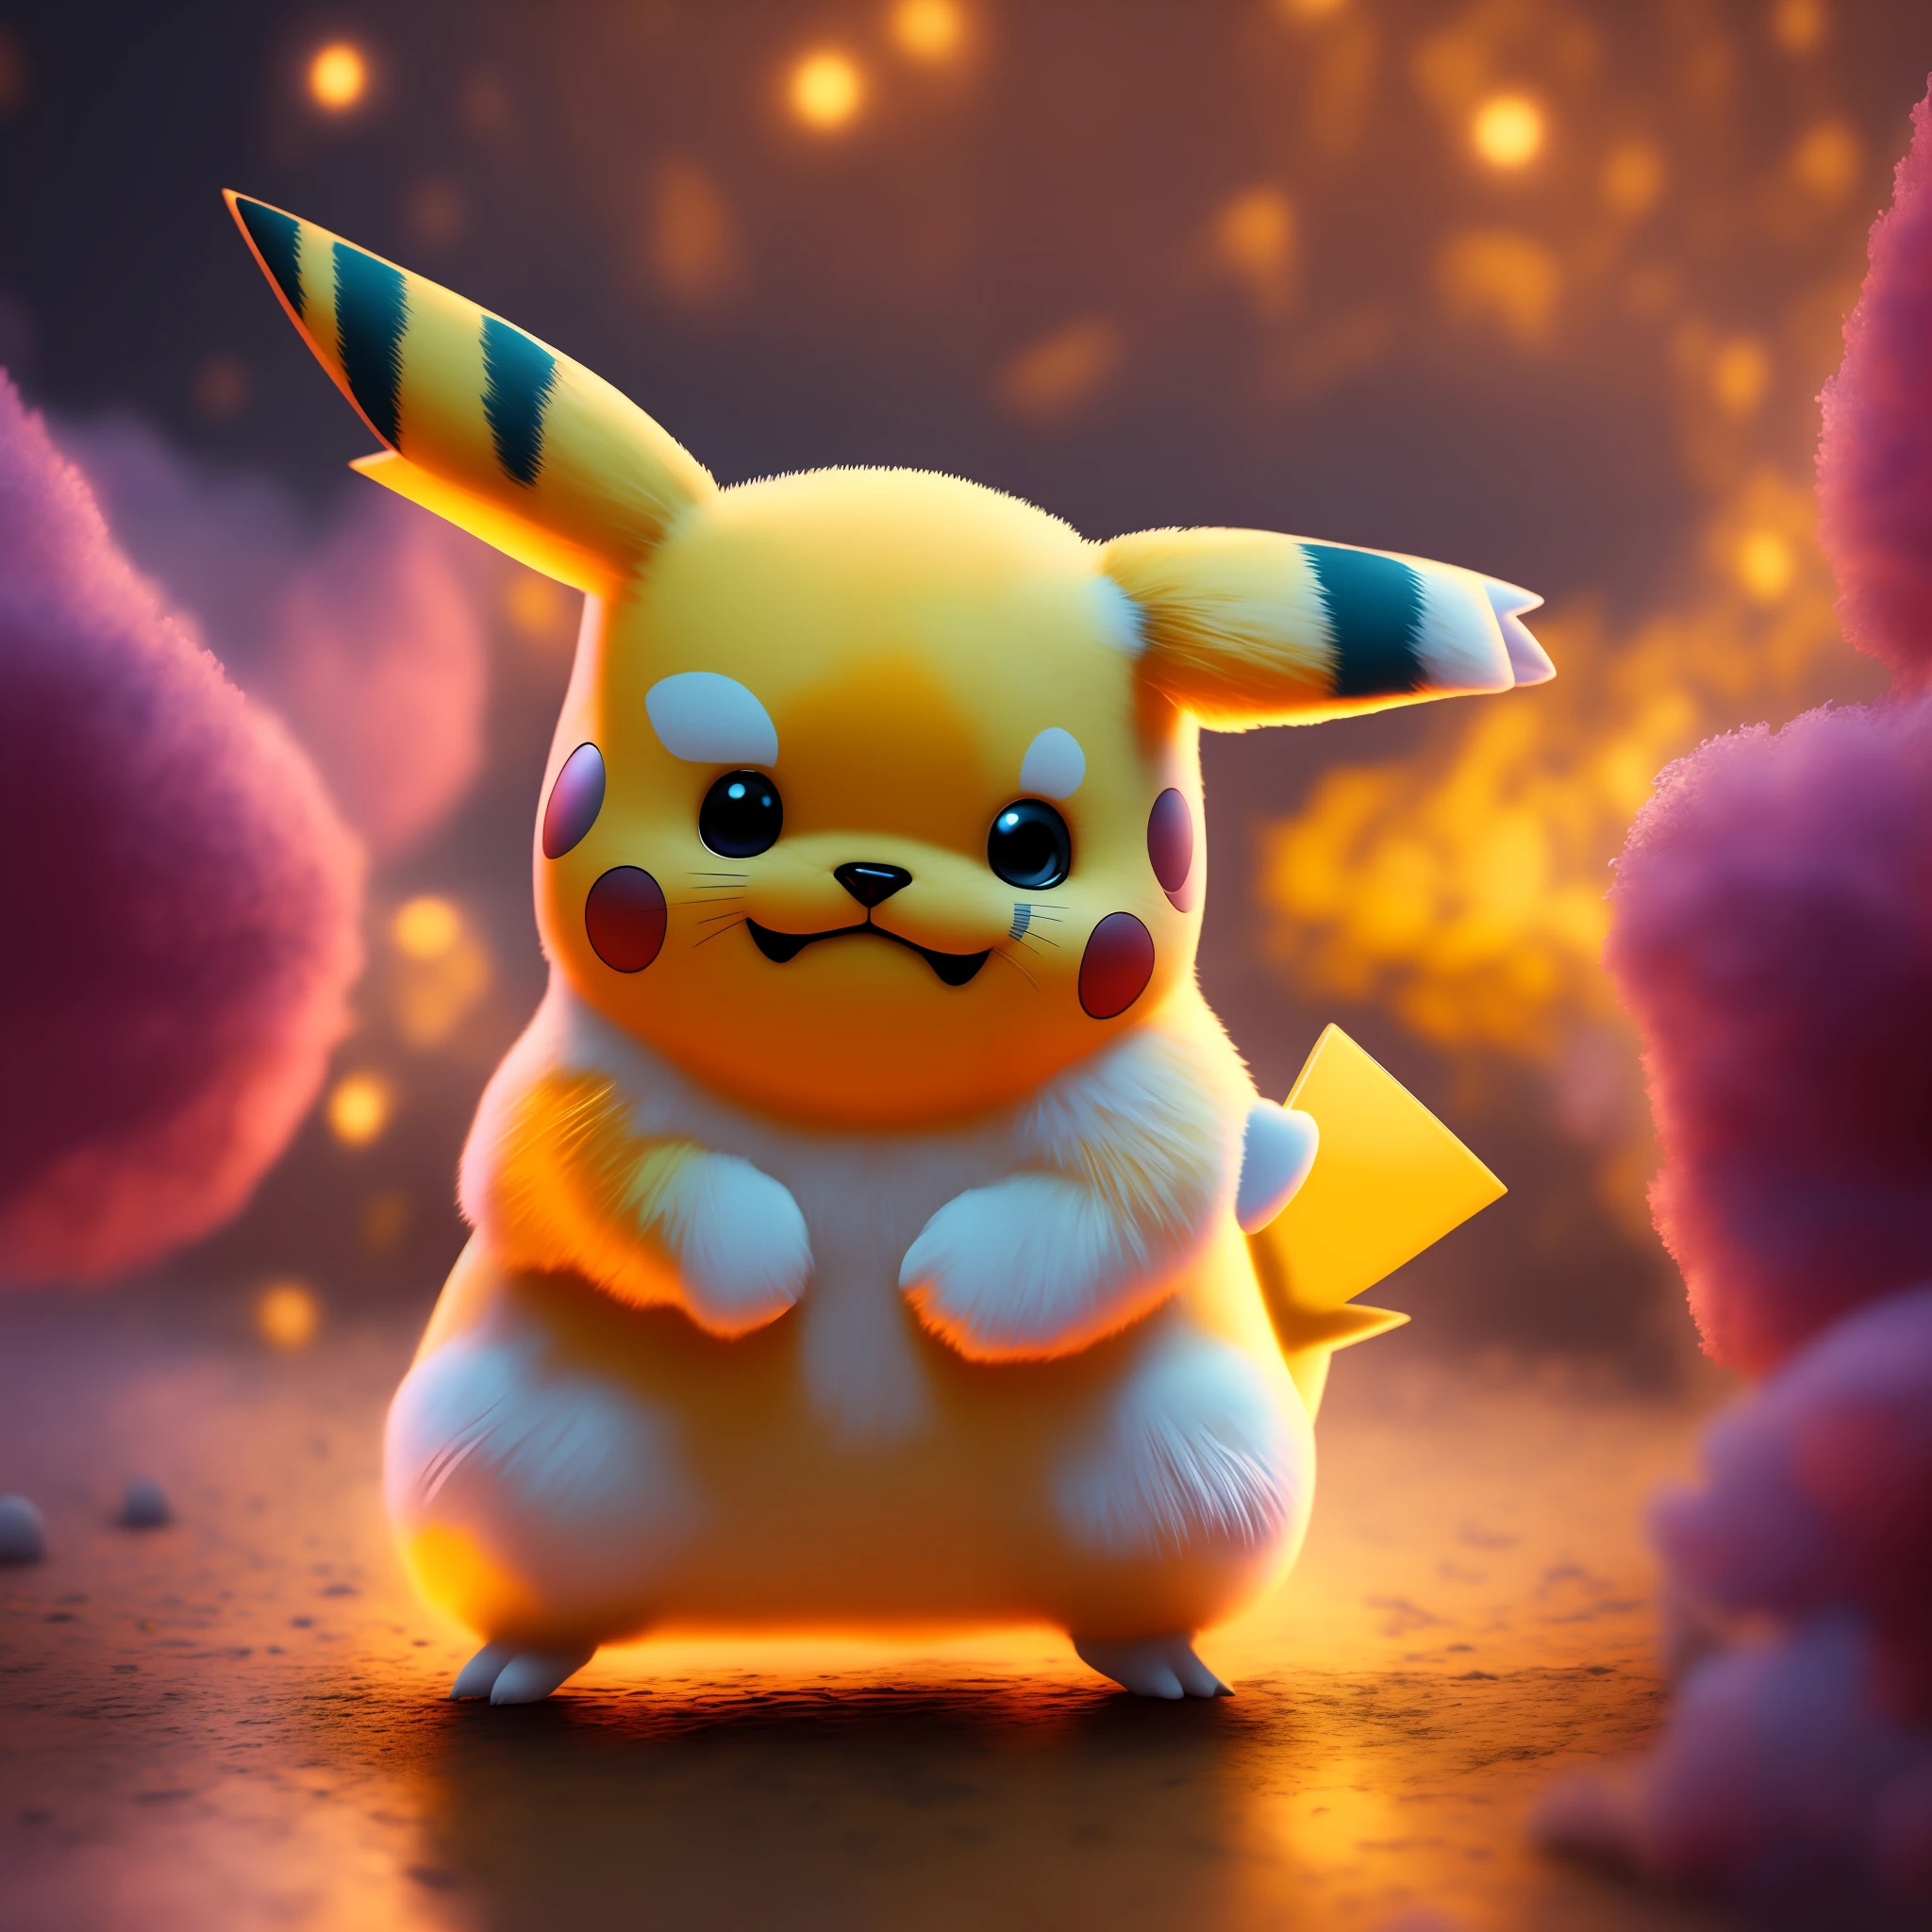 "An incredibly detailed and realistic digital painting of an extremely happy Pikachu, skillfully capturing dramatic lighting throughout the scene, created with the highest quality in 4K or 8K resolution and rendered in the Unreal Engine ™."